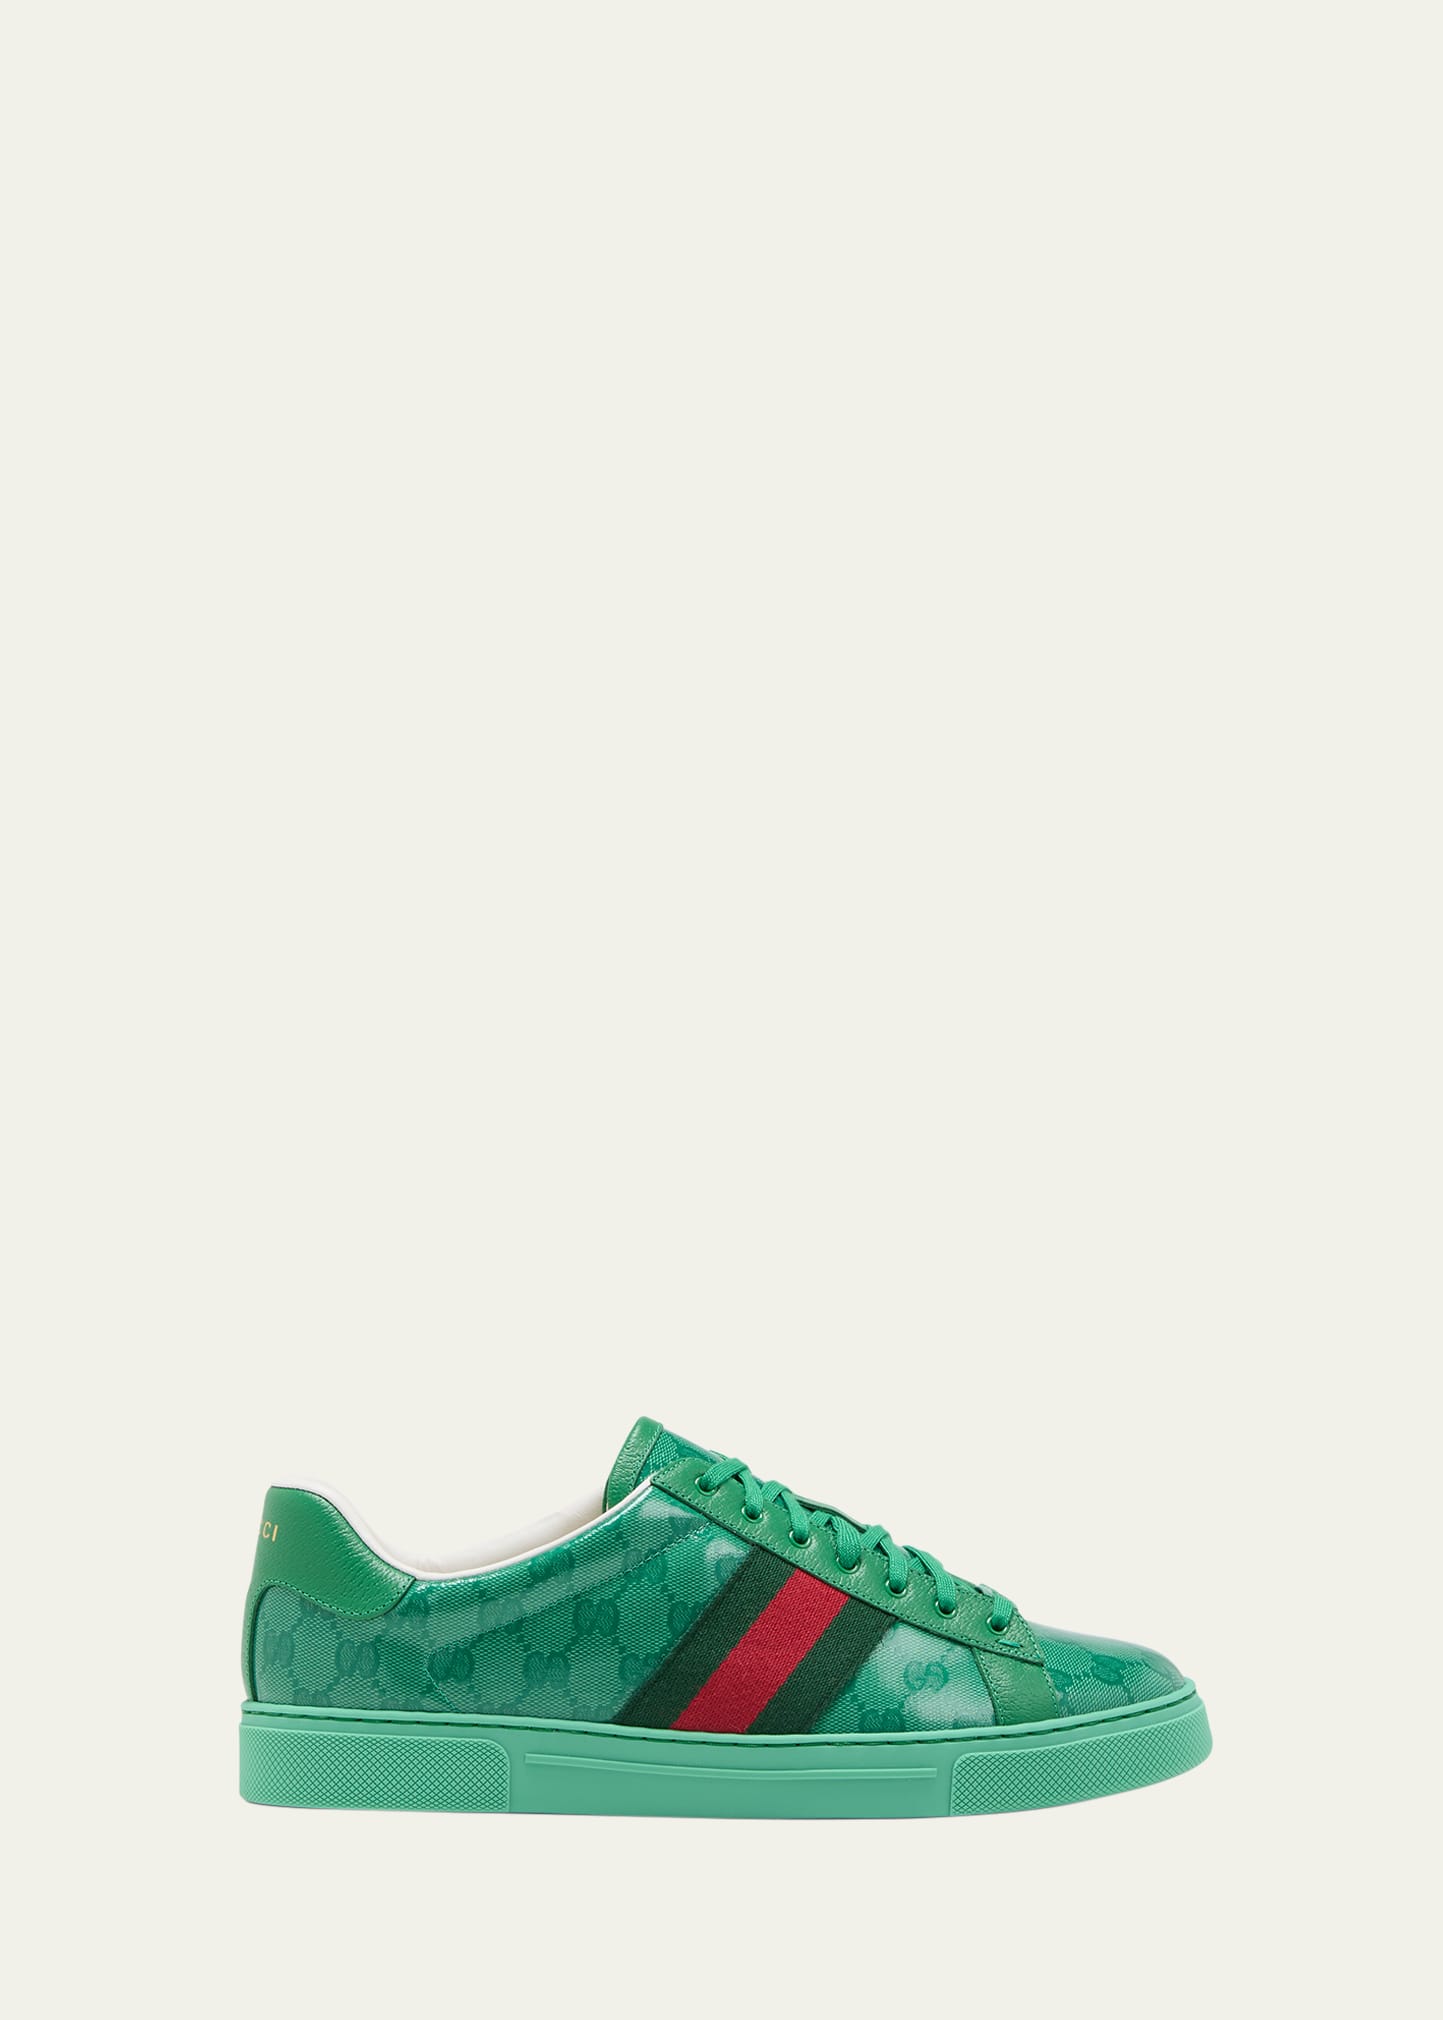 Gucci Ace Sneakers Men Size 9-G (9.5 US)